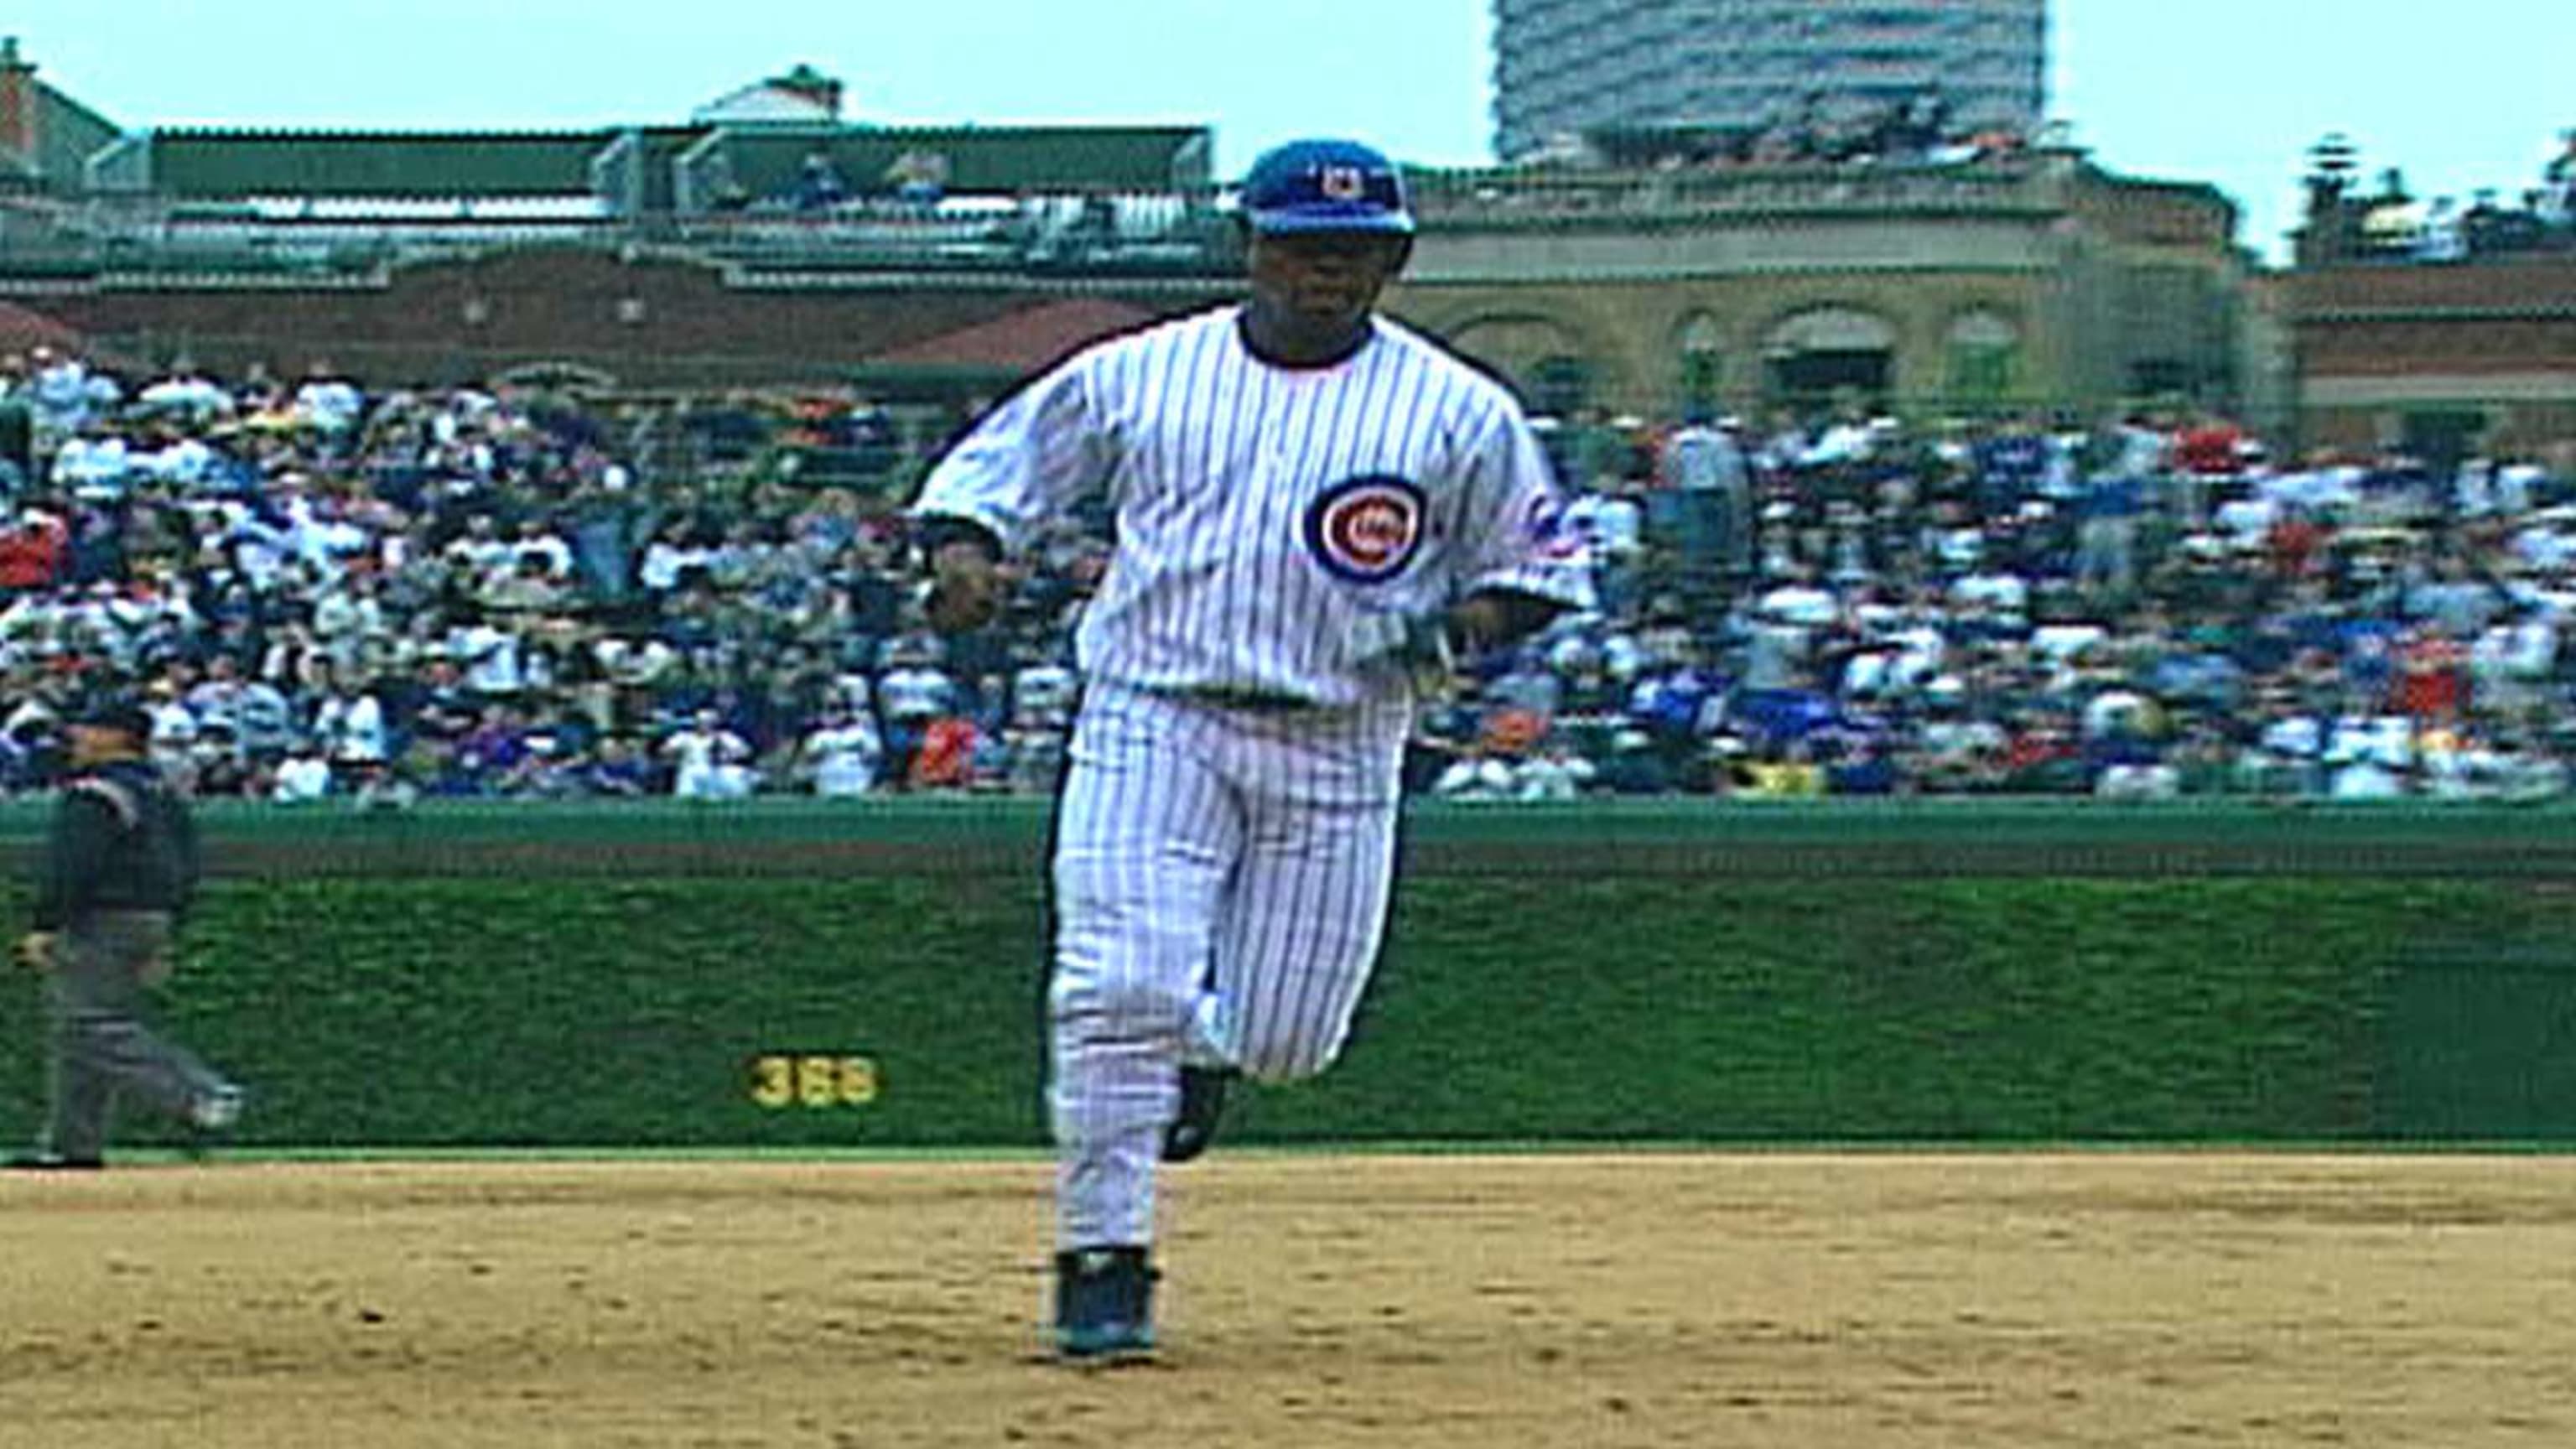 Does Sammy Sosa have a case for the Hall of Fame? - Bleed Cubbie Blue